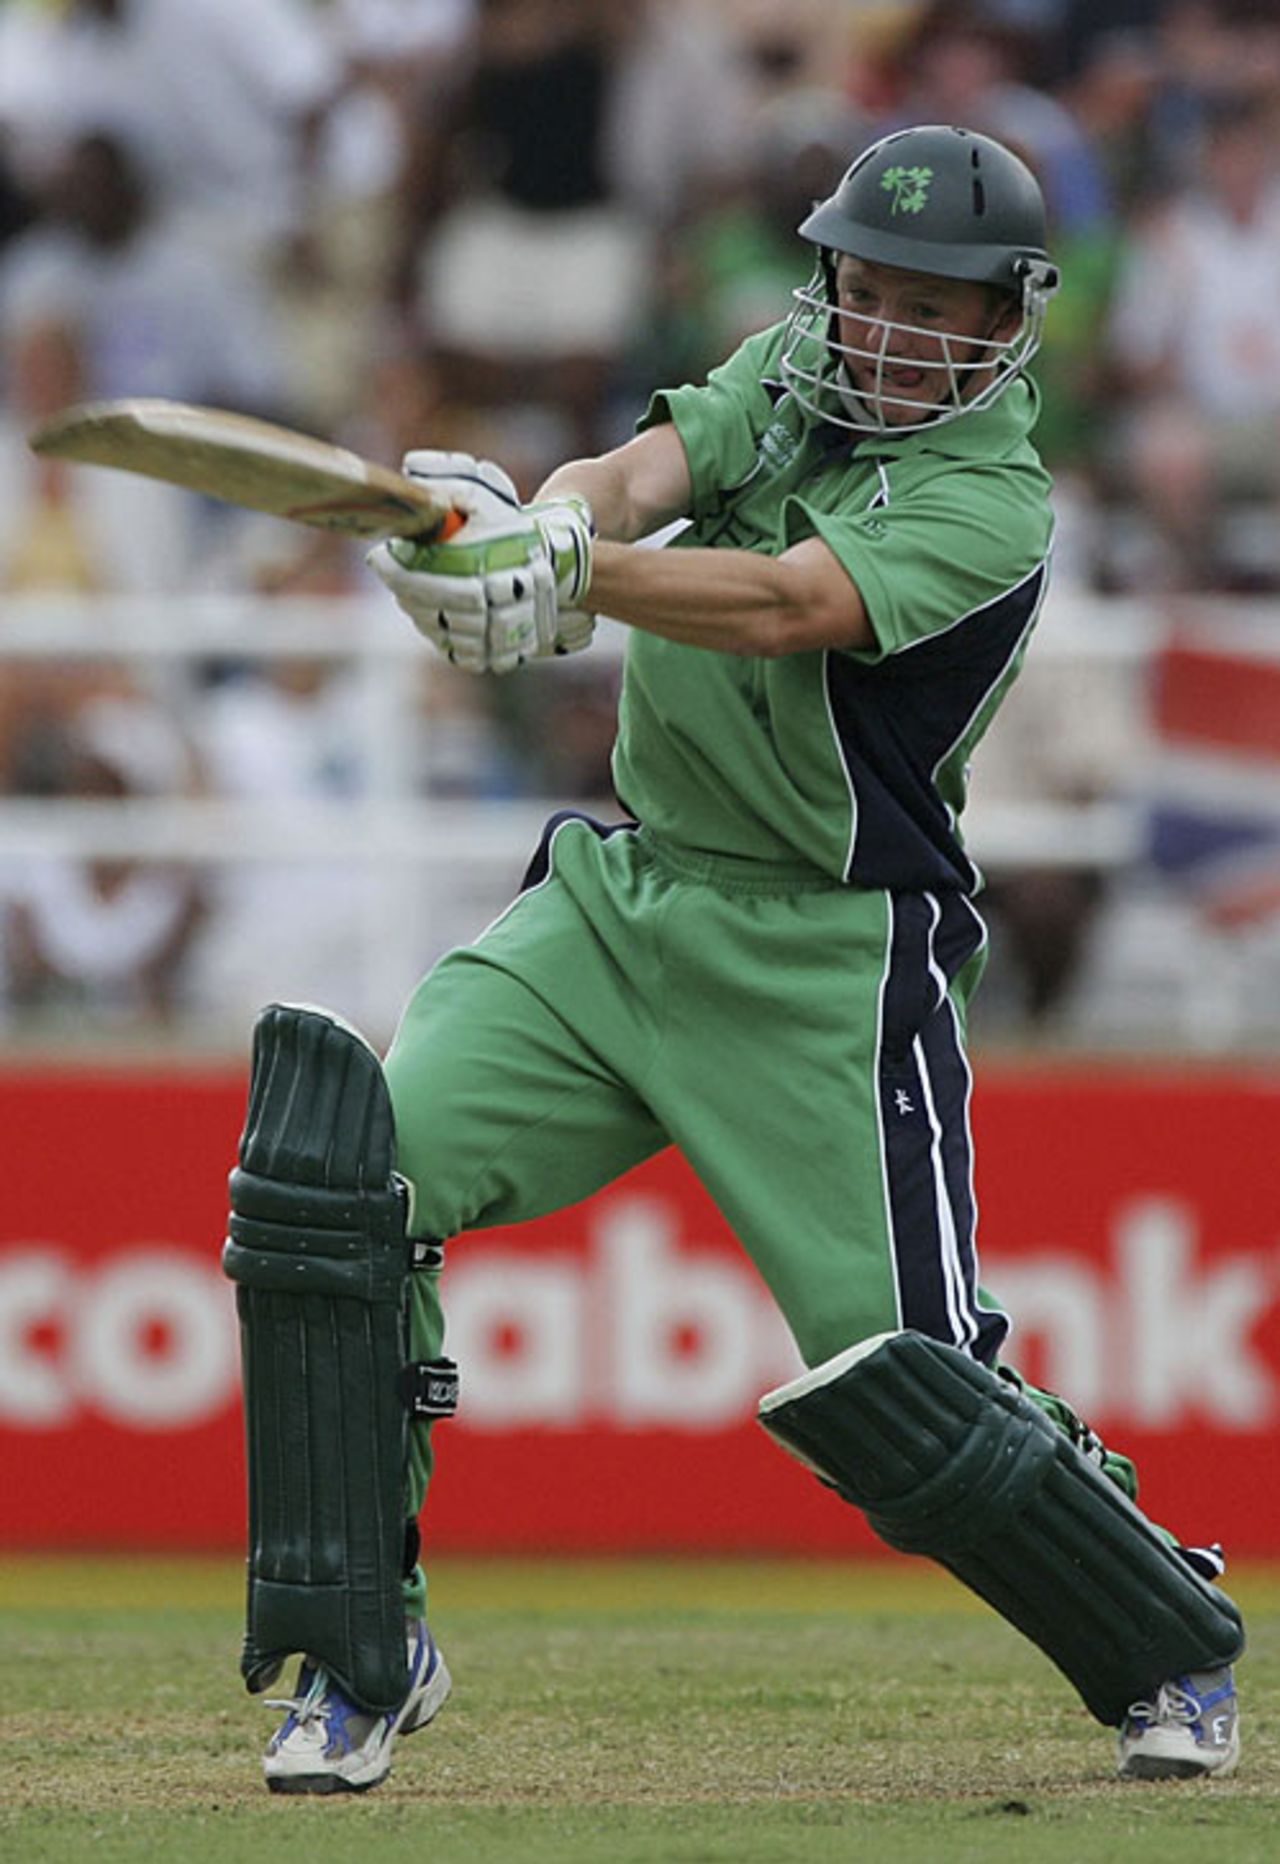 Niall O'Brien cuts hard during his fifty against Pakistan, Ireland v Pakistan, Group D, Jamaica, March 17, 2007